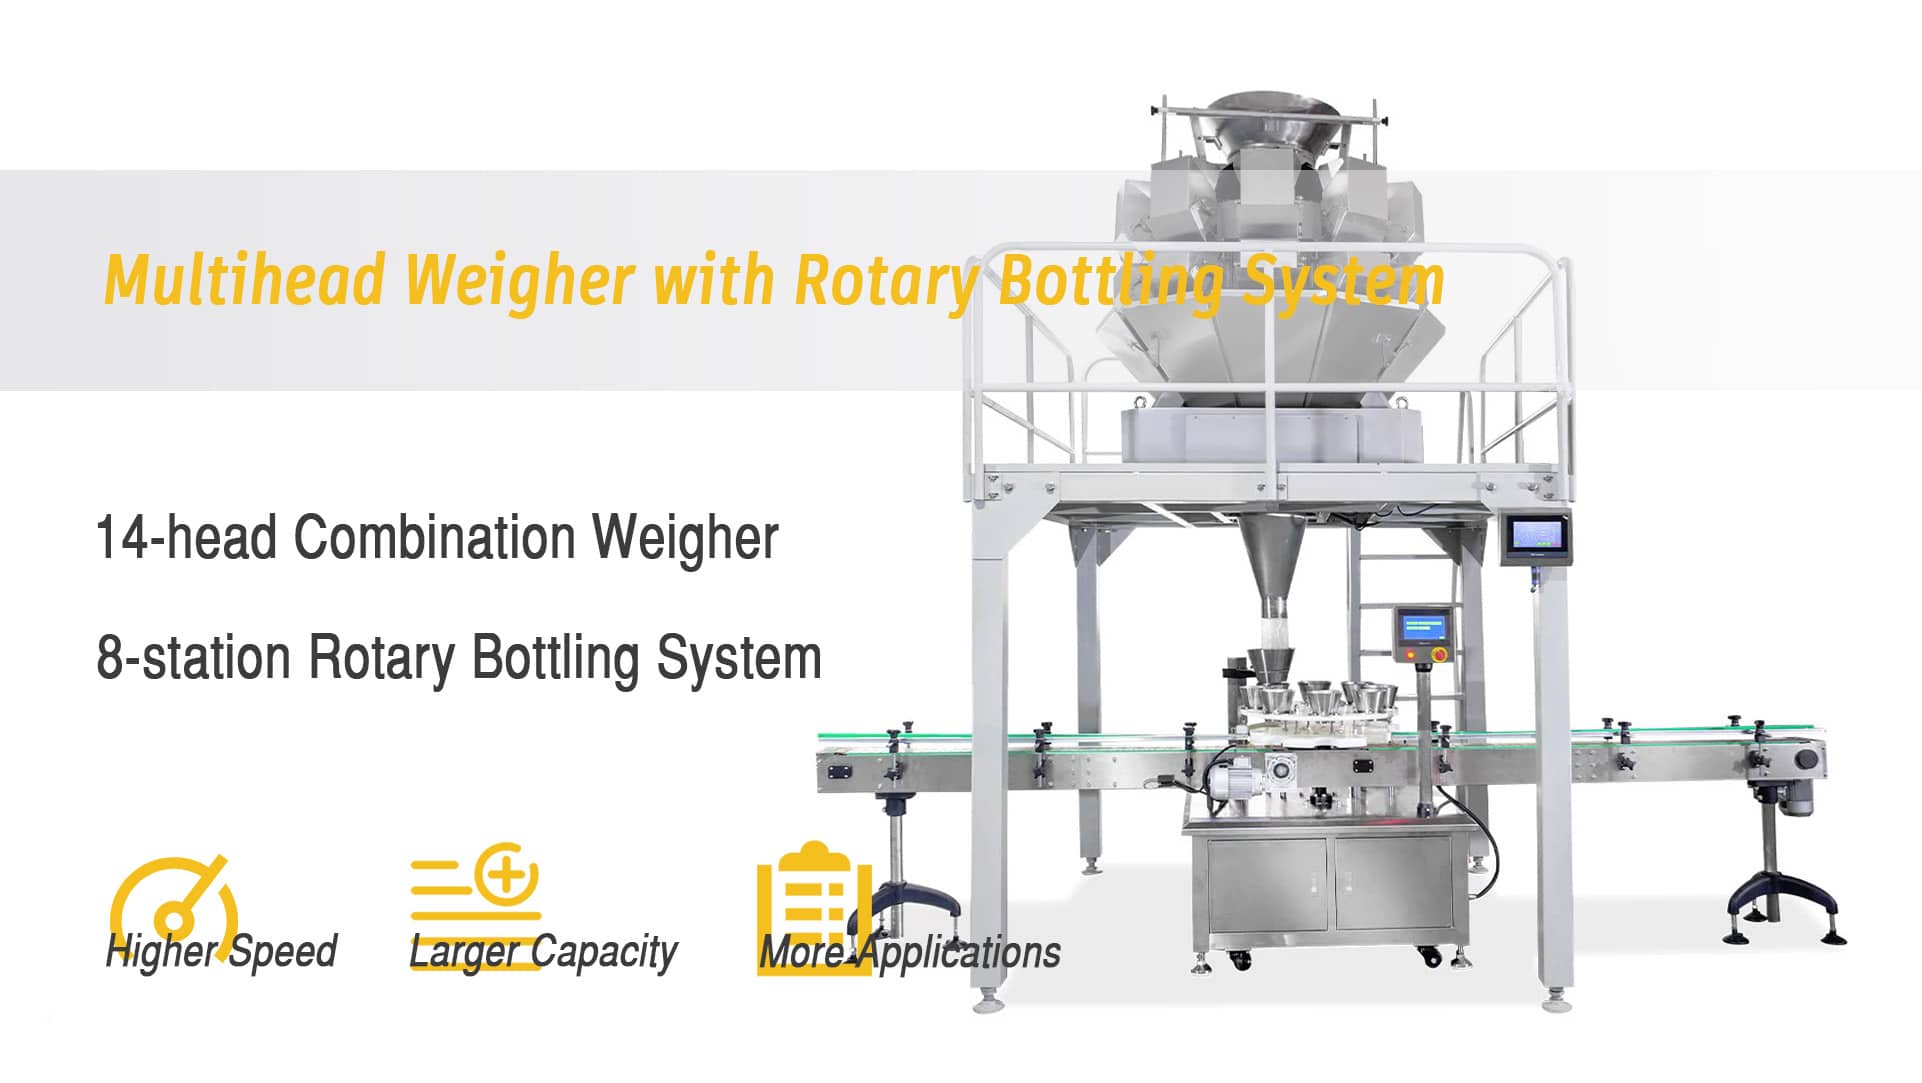 Multihead Weigher With Rotary Bottling System